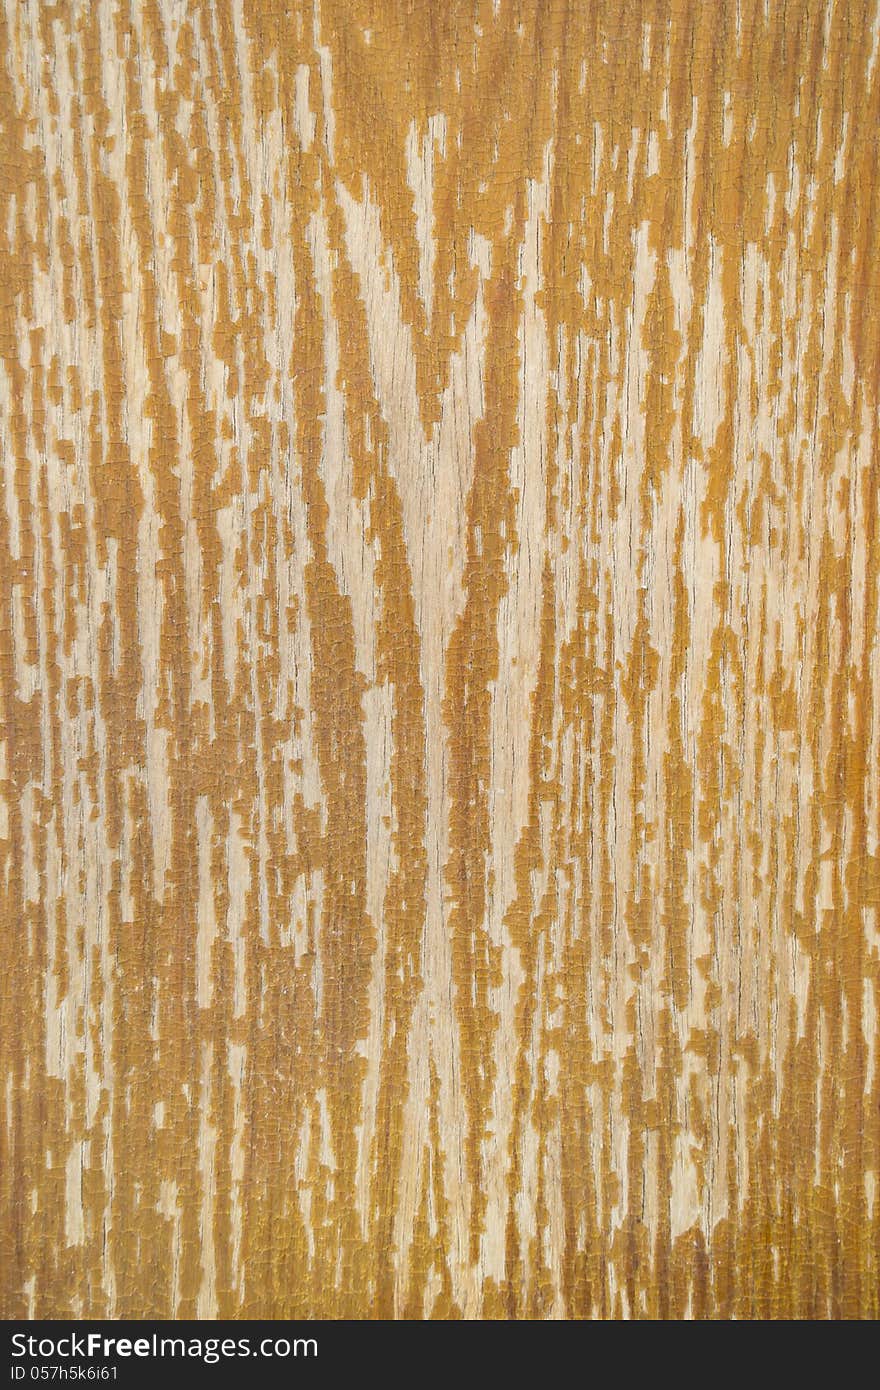 Painted yellow shabby wooden texture